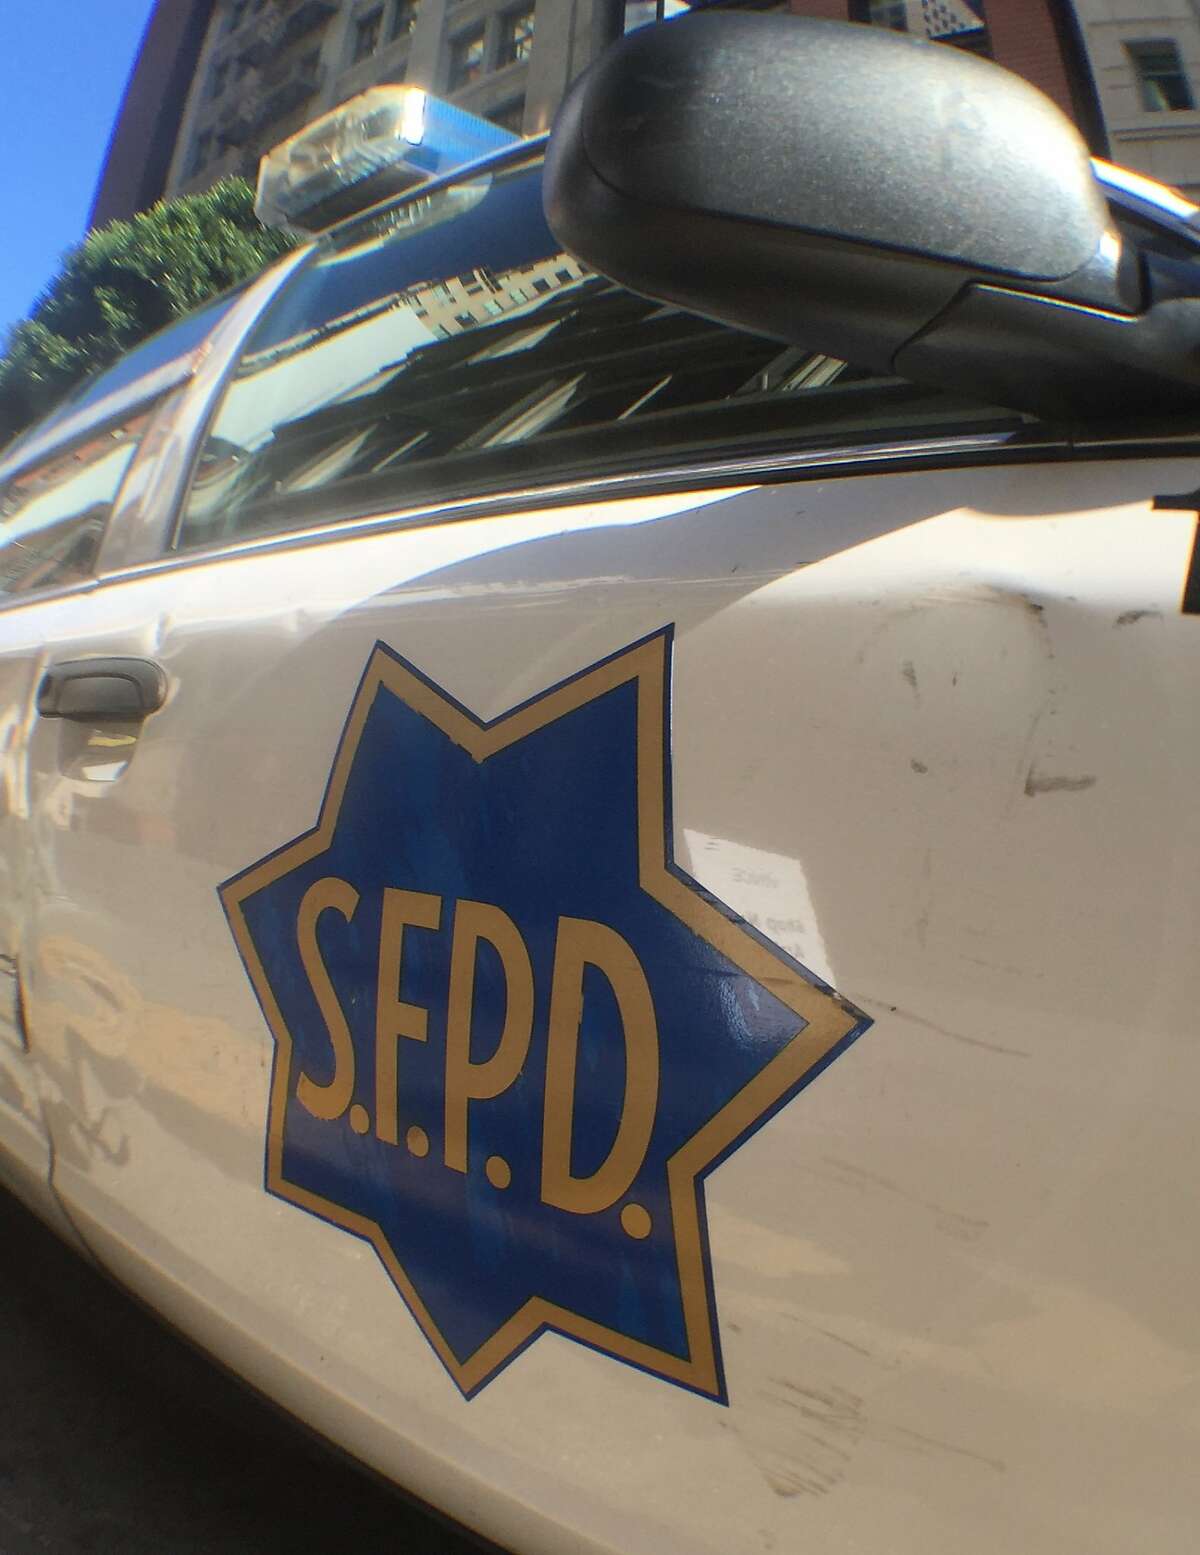 Former San Francisco police officer Patricia Burley, who was a 22-year veteran before her retirement two months ago, said in a legal claim filed Wednesday that former police captain Greg Suhr forced her to retire.